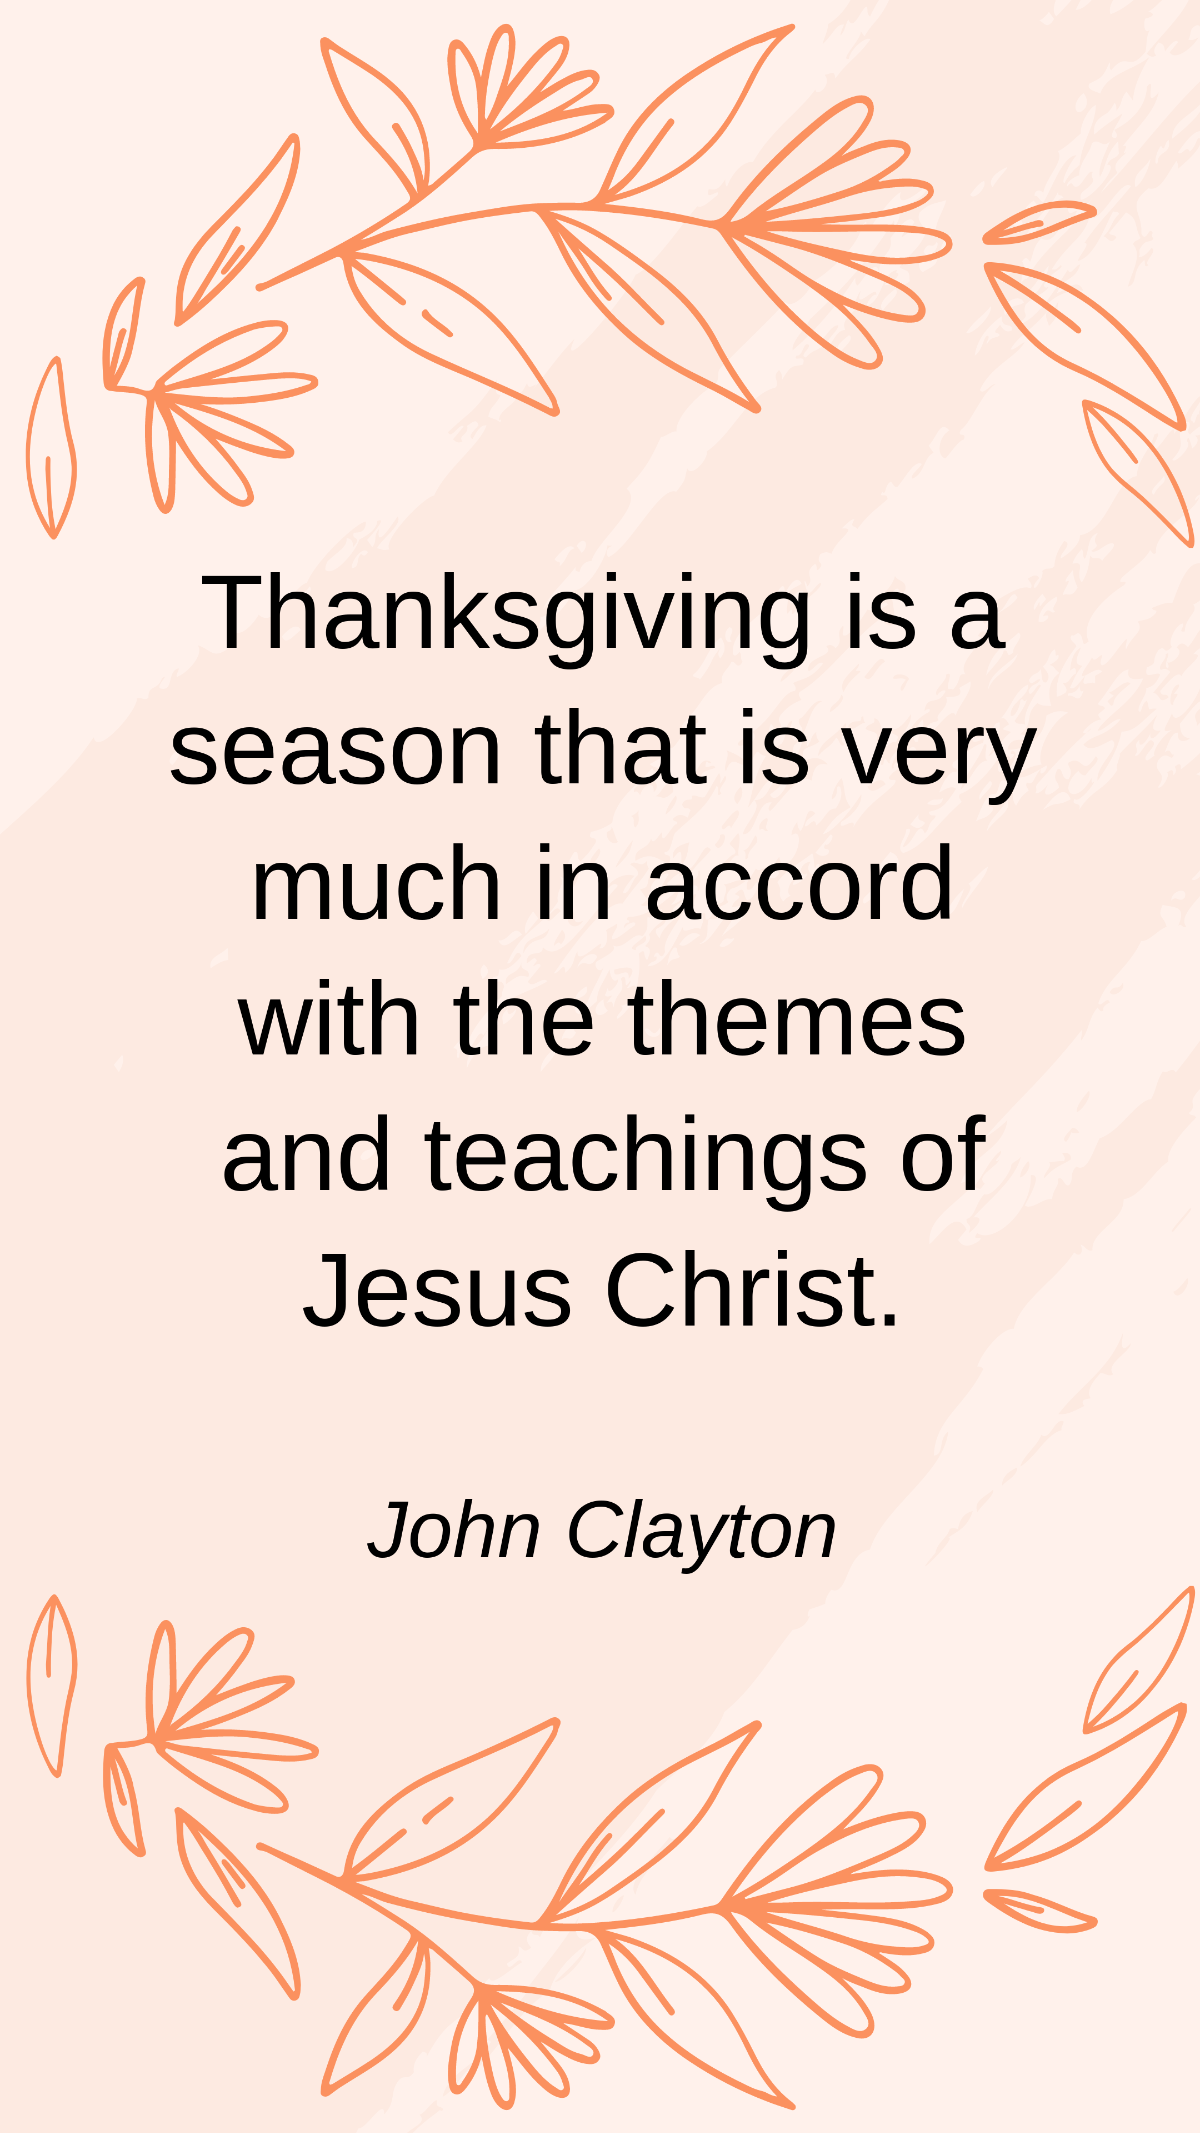 John Clayton - Thanksgiving is a season that is very much in accord with the themes and teachings of Jesus Christ. Template